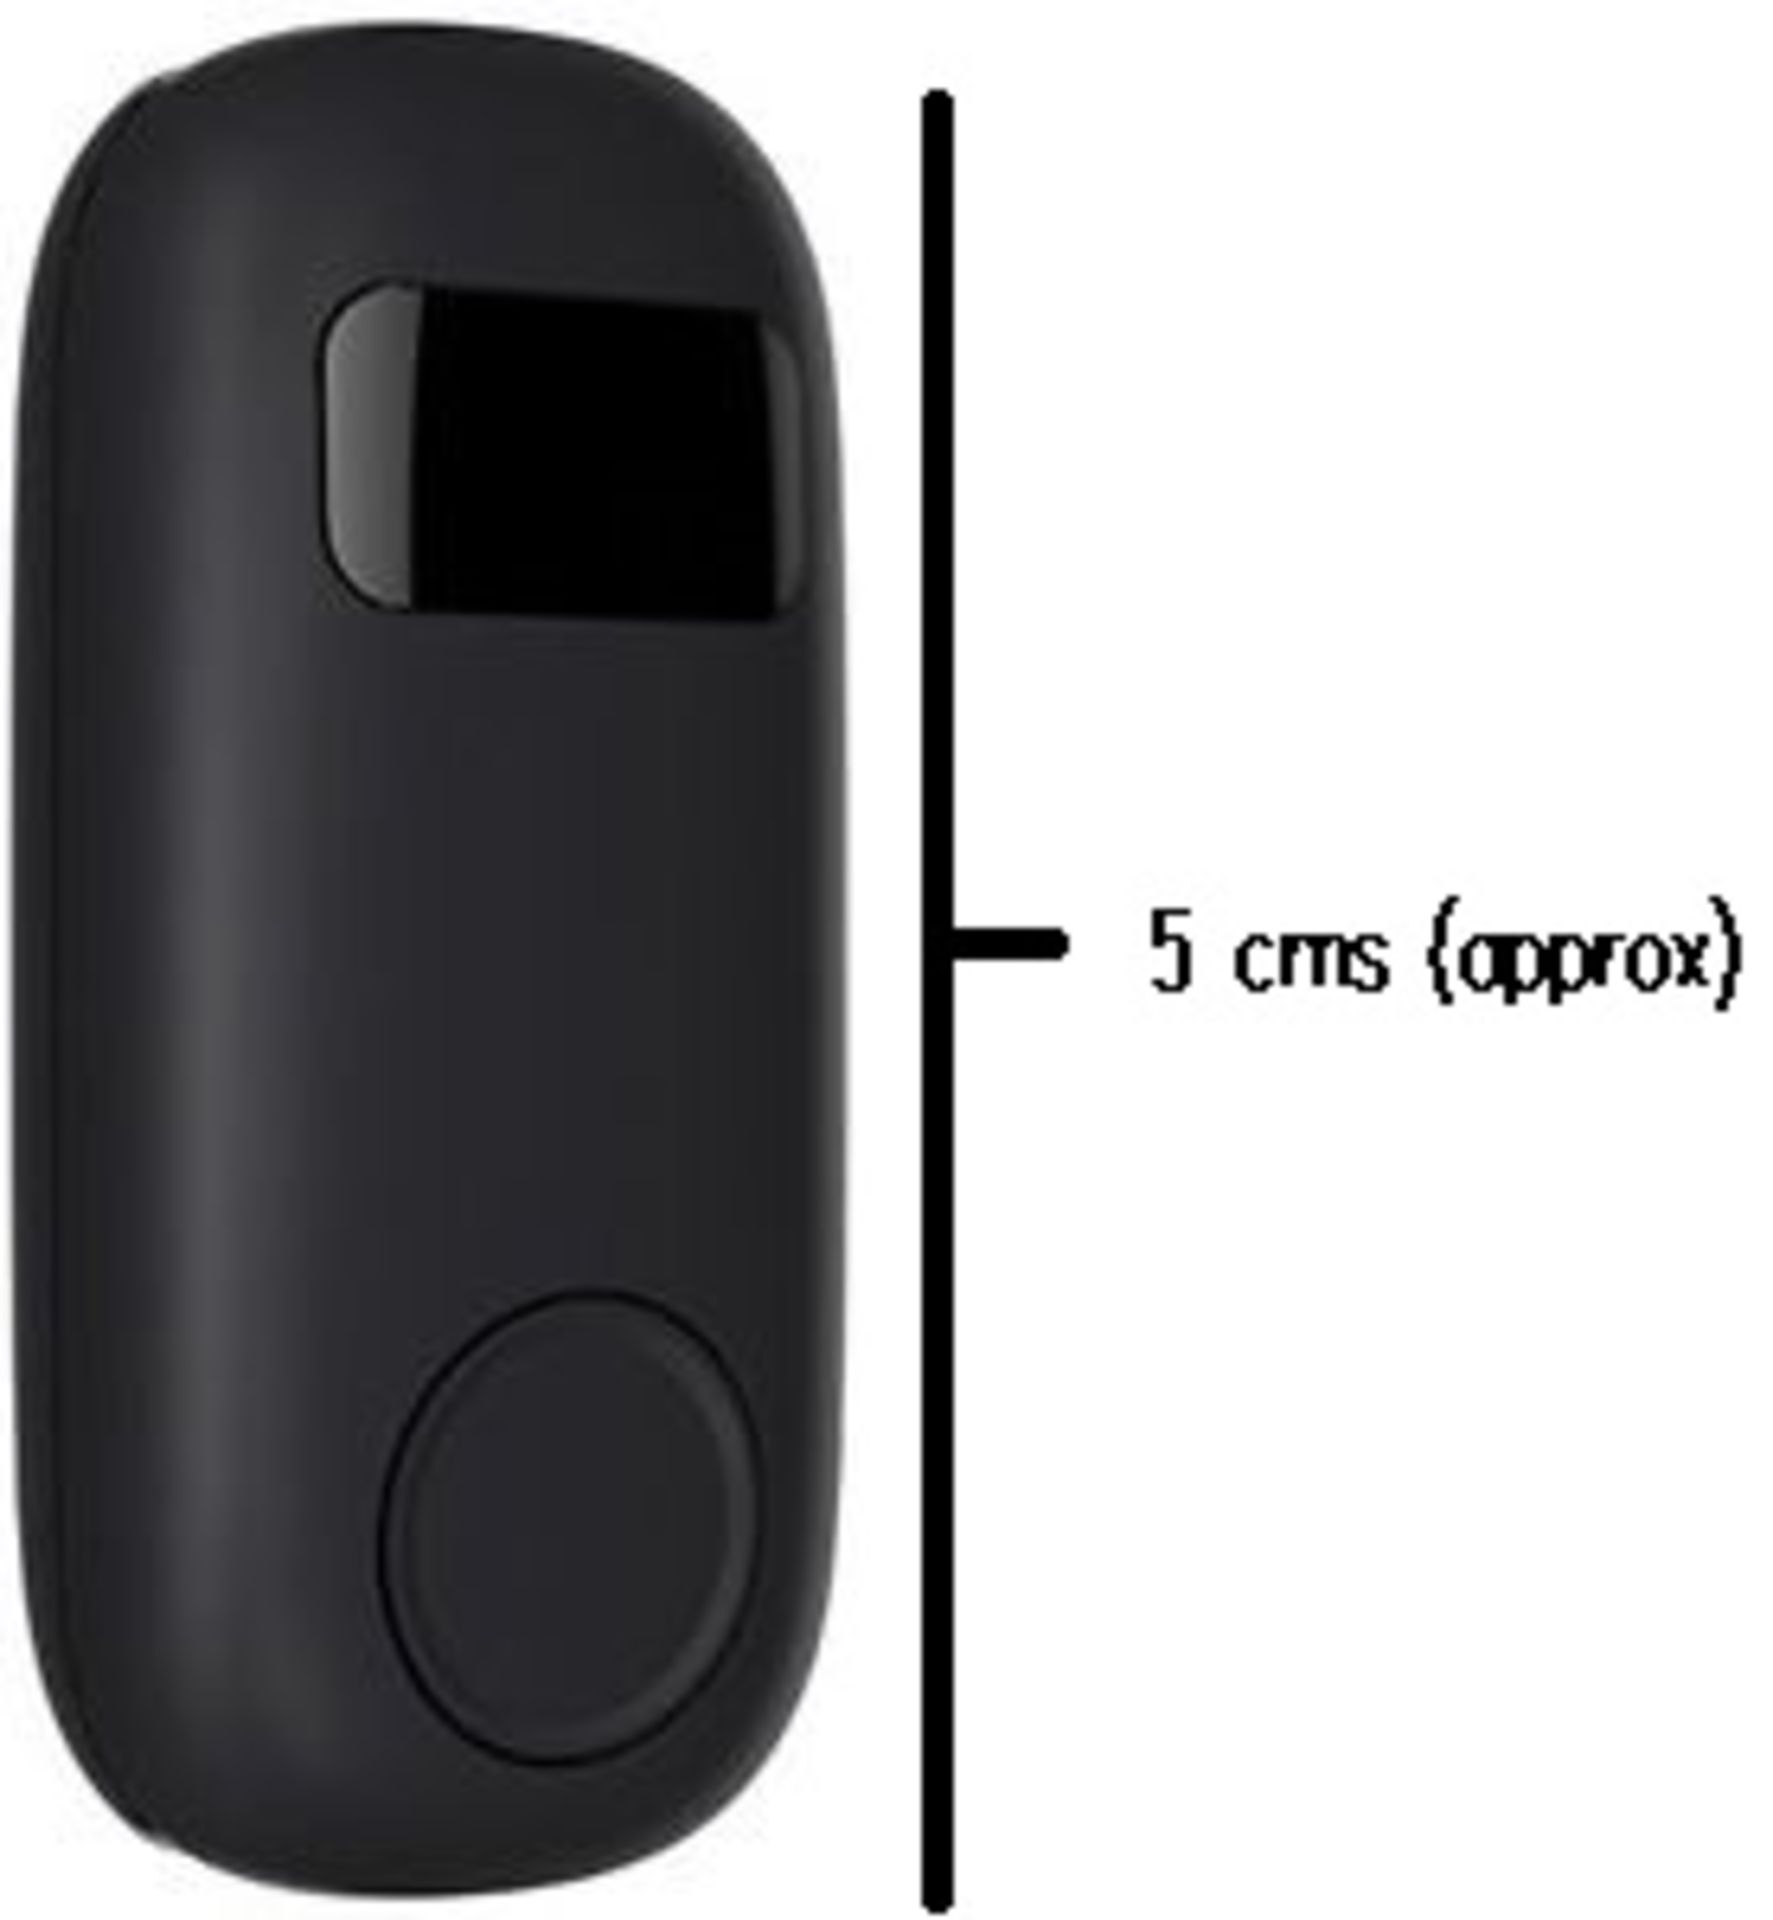 V *TRADE QTY* Brand New SonQui-Worlds Smallest GPS Tracker - With Smartphone App for iOS and Android - Image 2 of 2